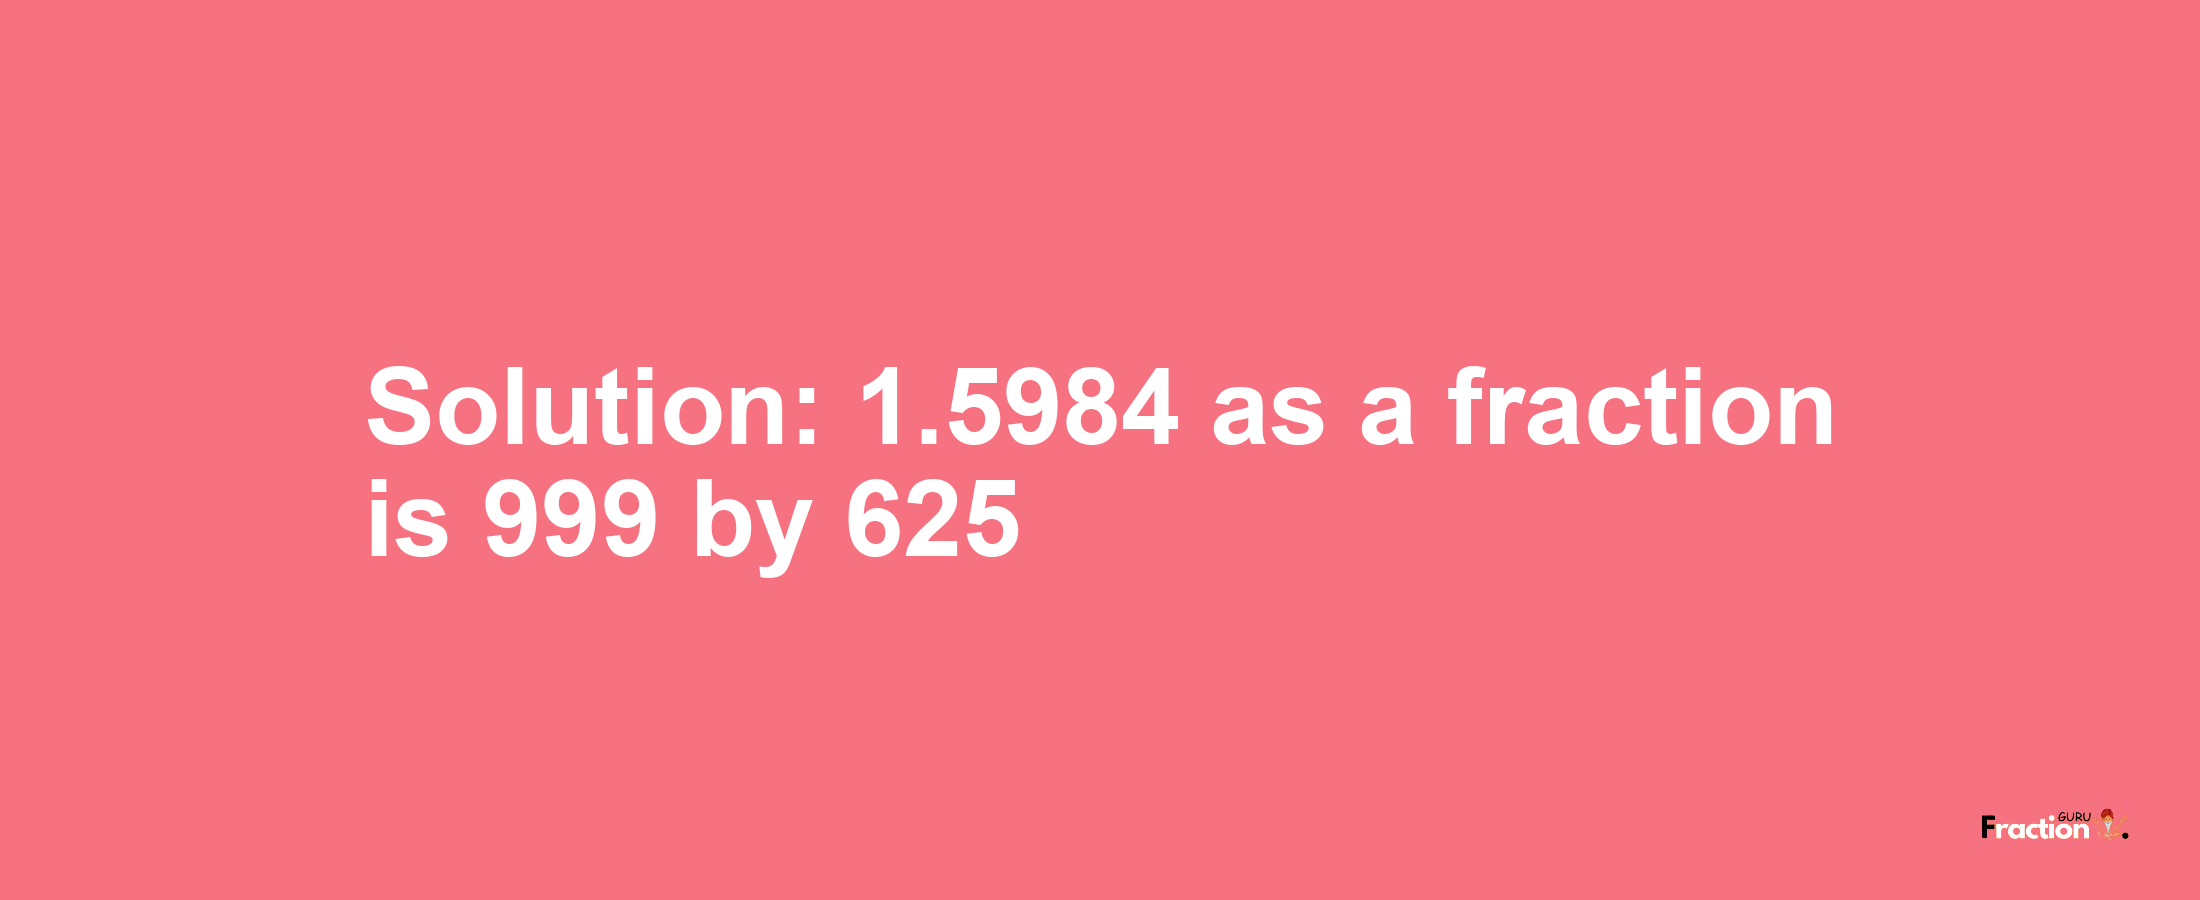 Solution:1.5984 as a fraction is 999/625